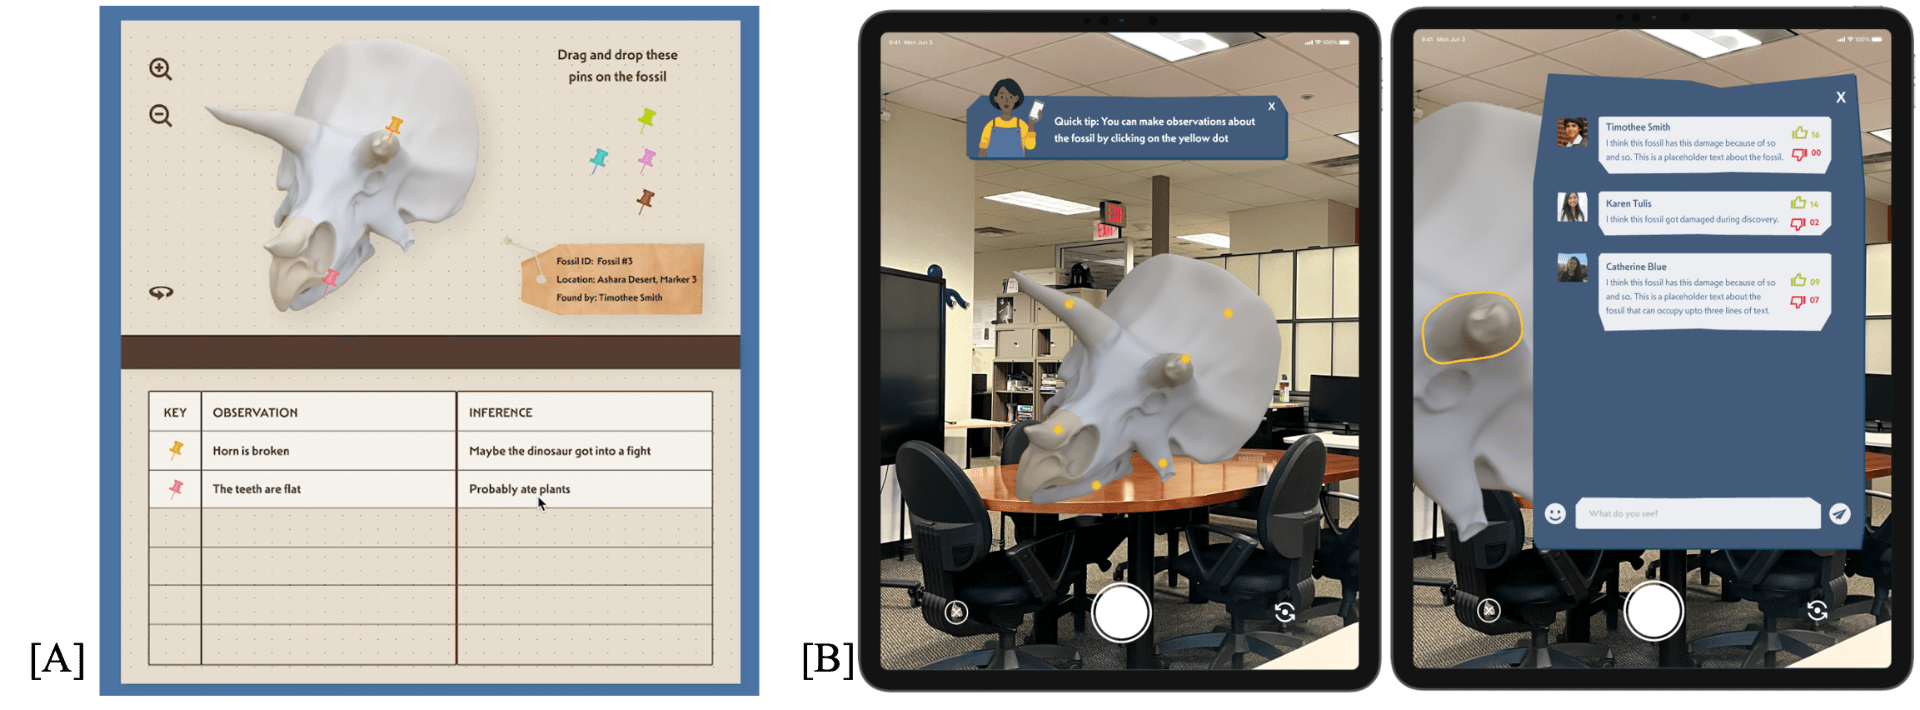 3-part Screen captures of AR platform. Left image is a scientific journal with a triceratops skull and blank spaces for observations and inferences. Center and left images show the triceratops skull overlaid on a conference table and a mockup of a student conversation, respectively.